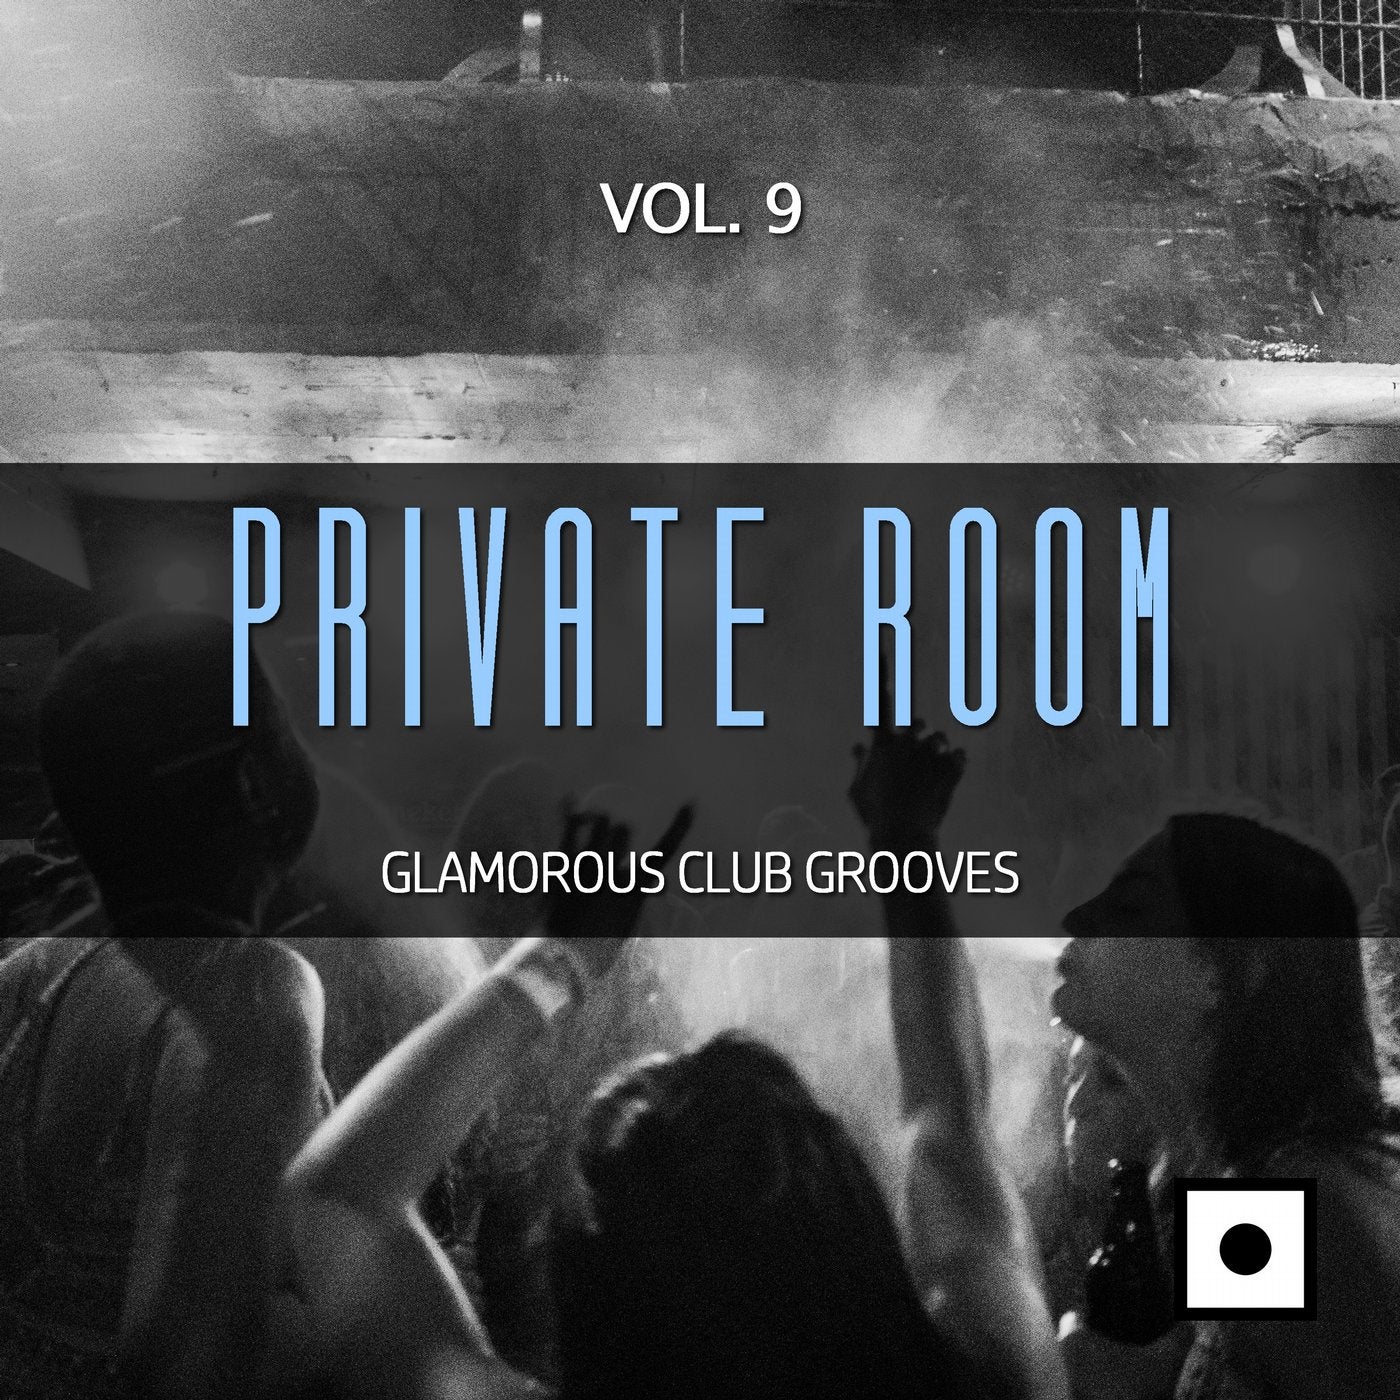 Private Room, Vol. 9 (Glamorous Club Grooves)